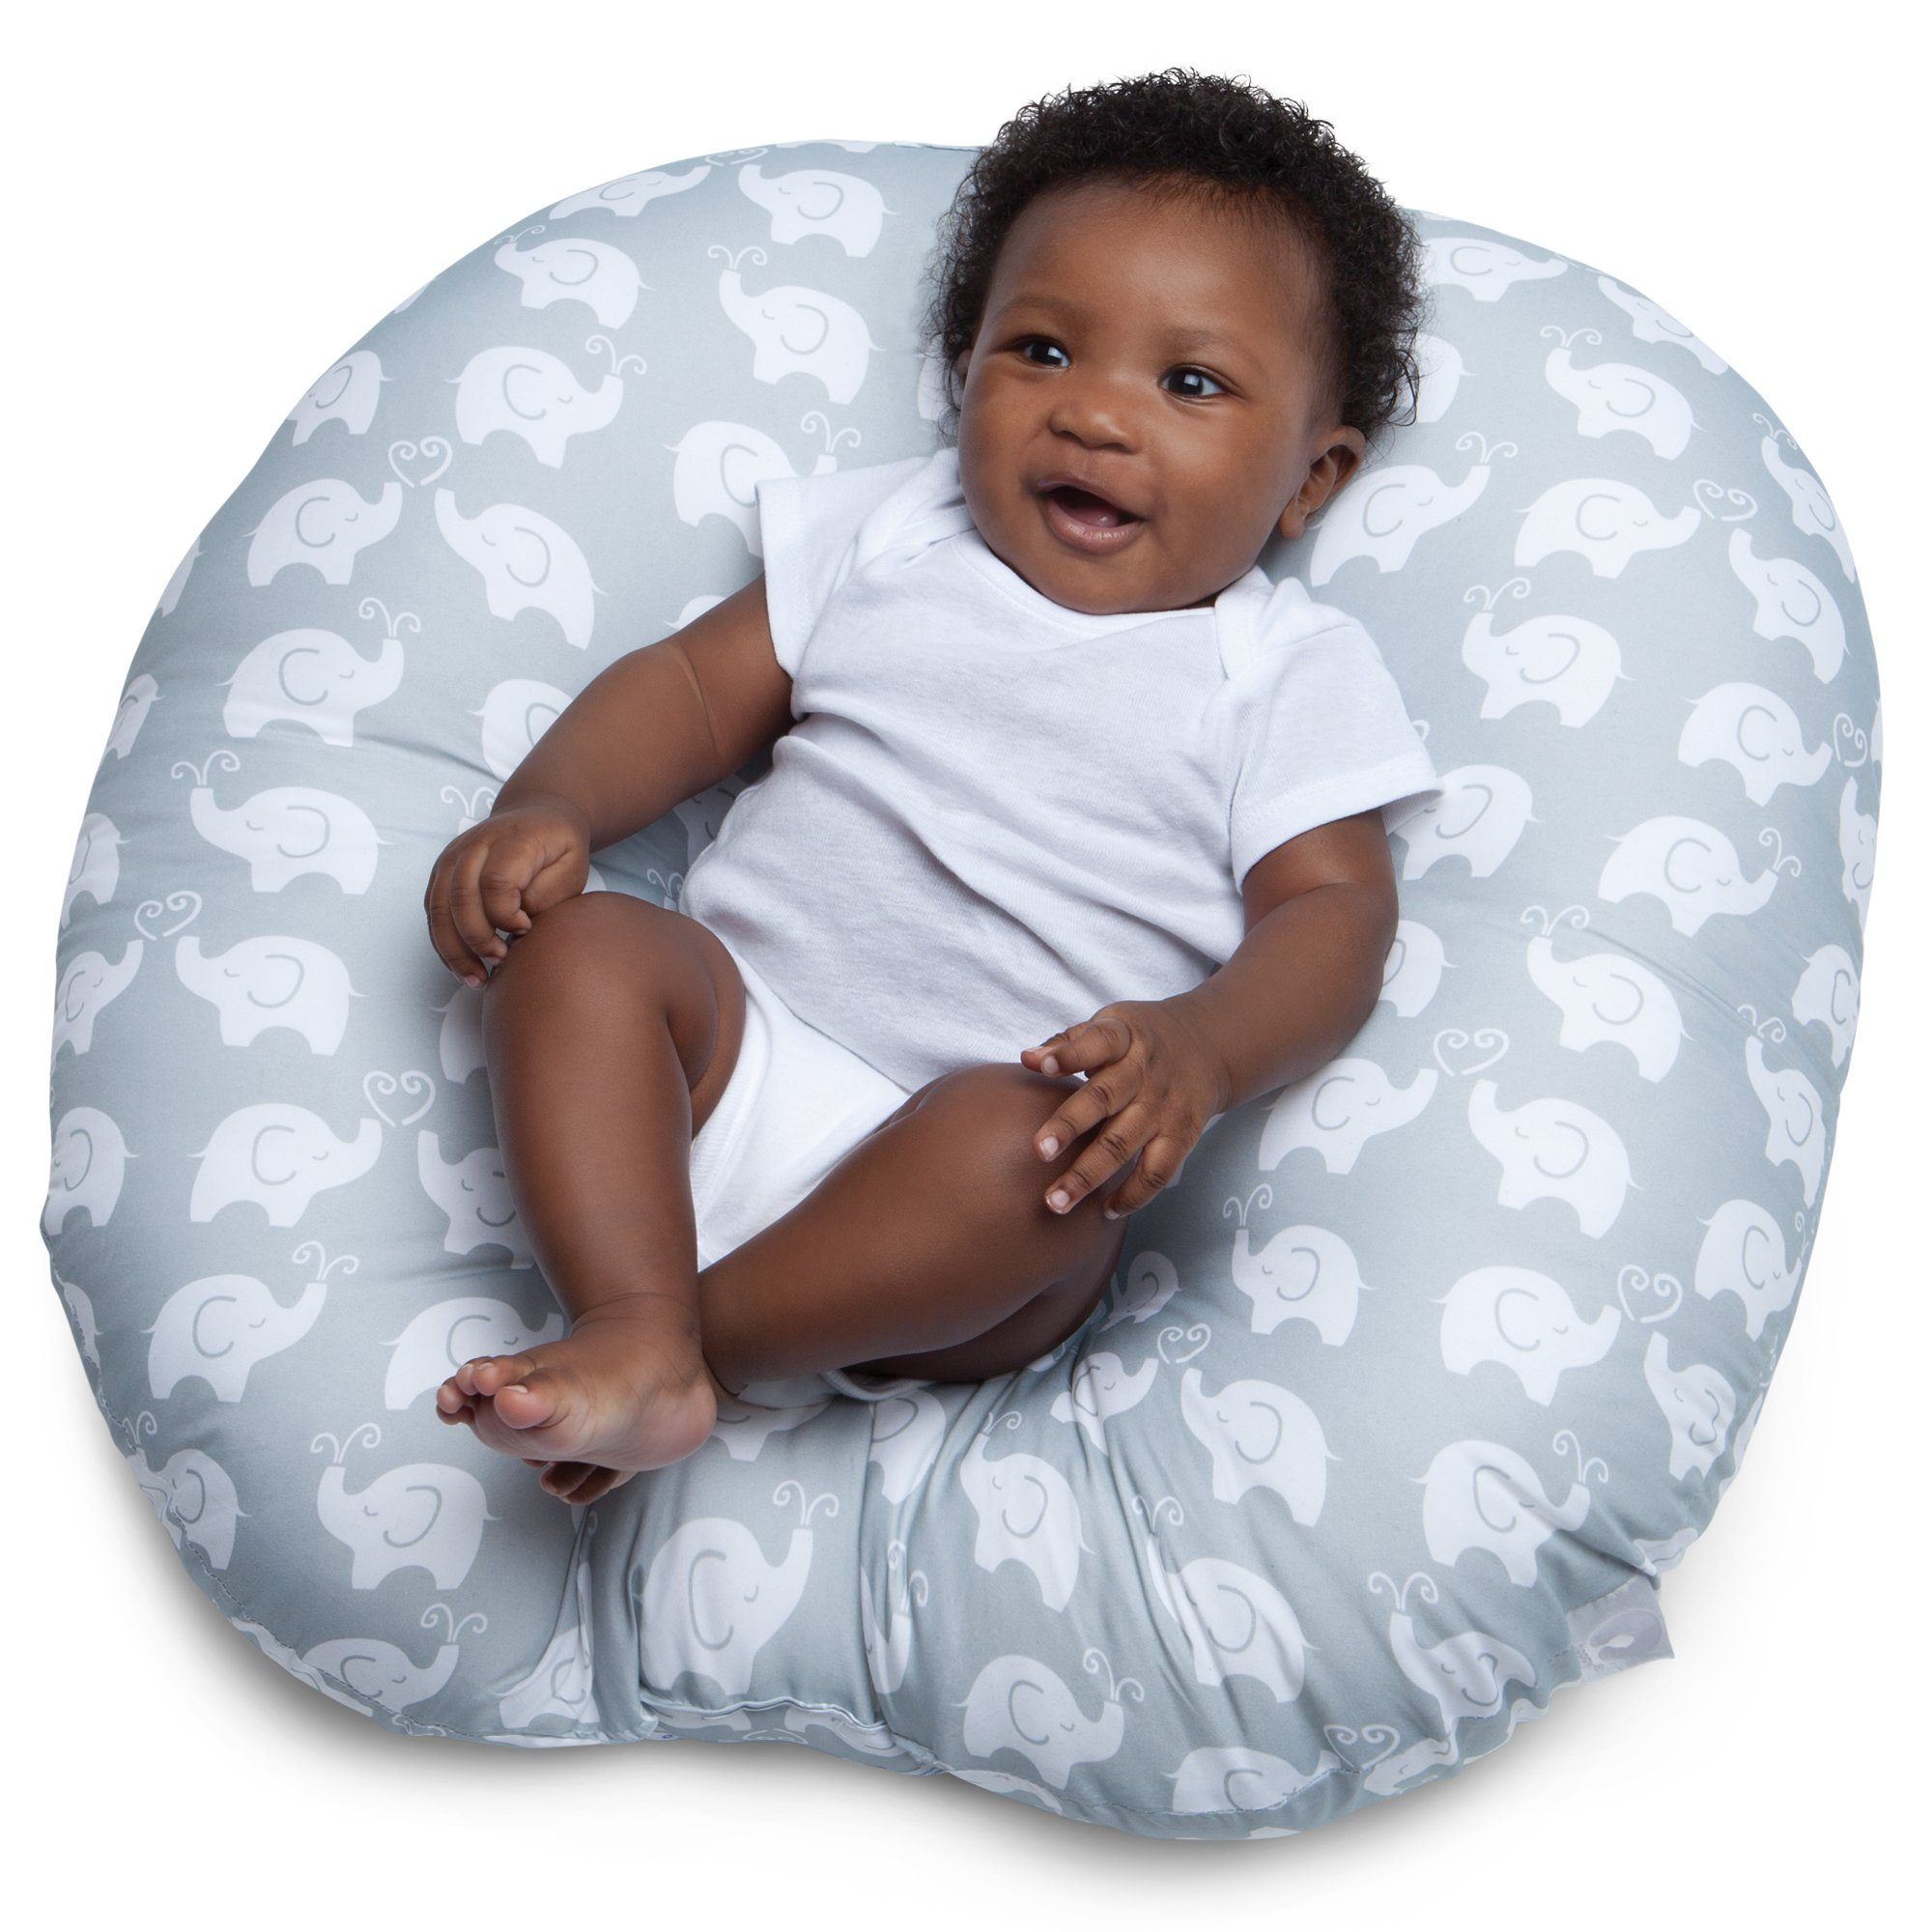 The Newborn Lounger Has Been Found To Be Dangerous To Infants